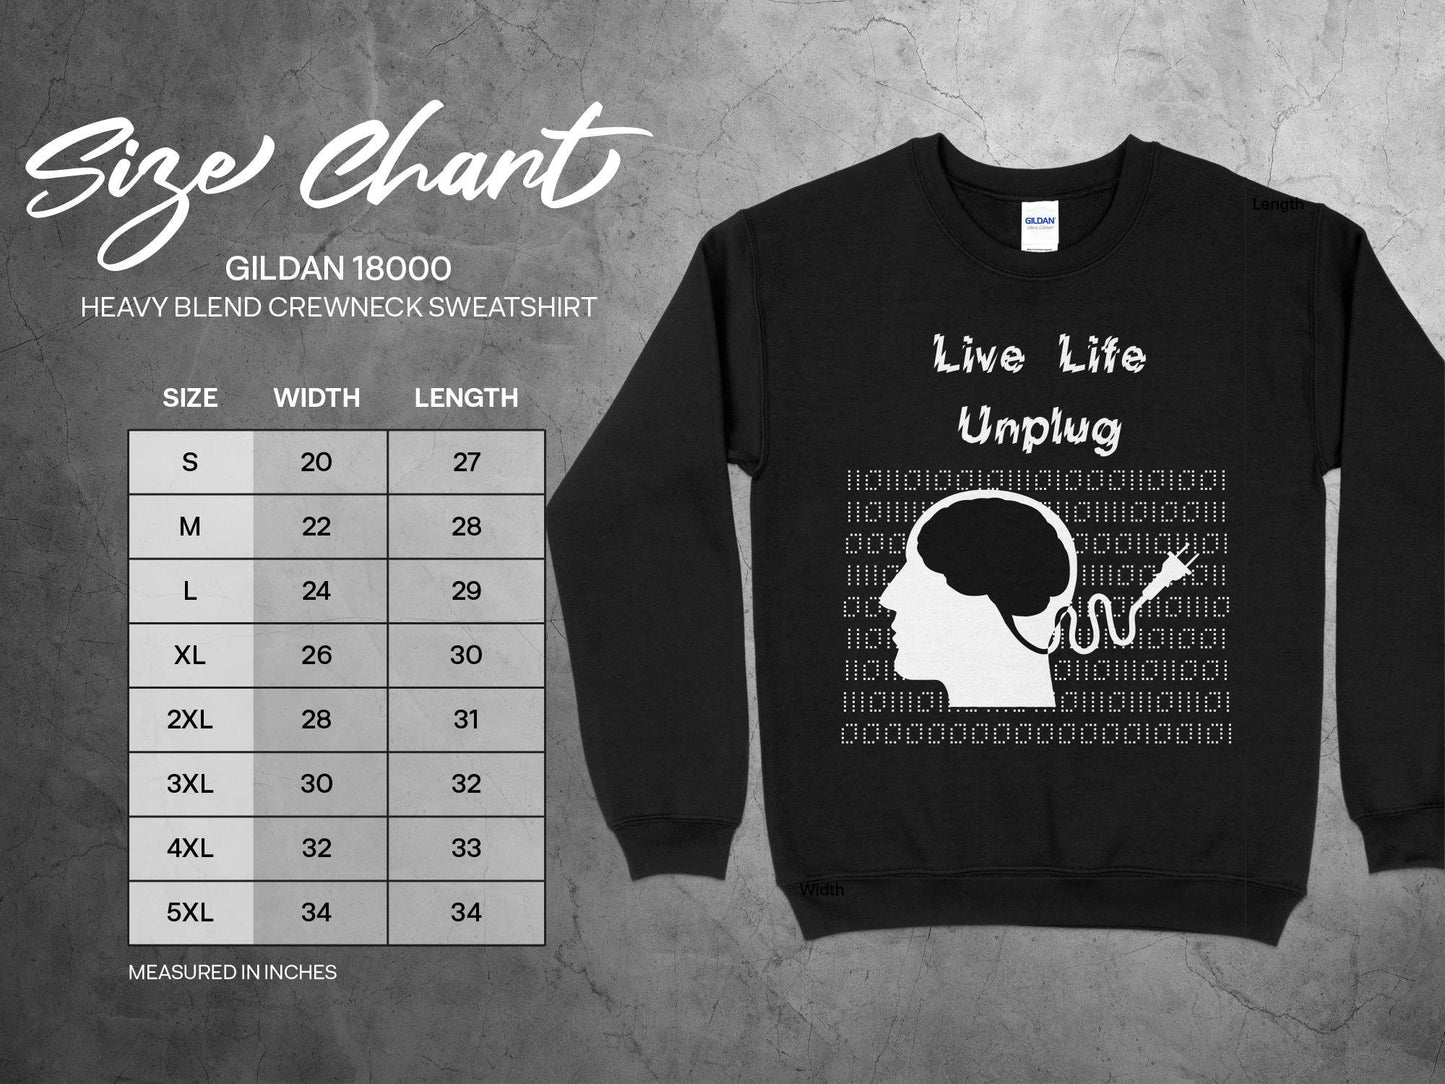 Live Life Unplug Long Sleeve T-Shirt - Embrace Connection and Simplicity. No Gadget Technology Reconnect Back to Basic SweatShirt